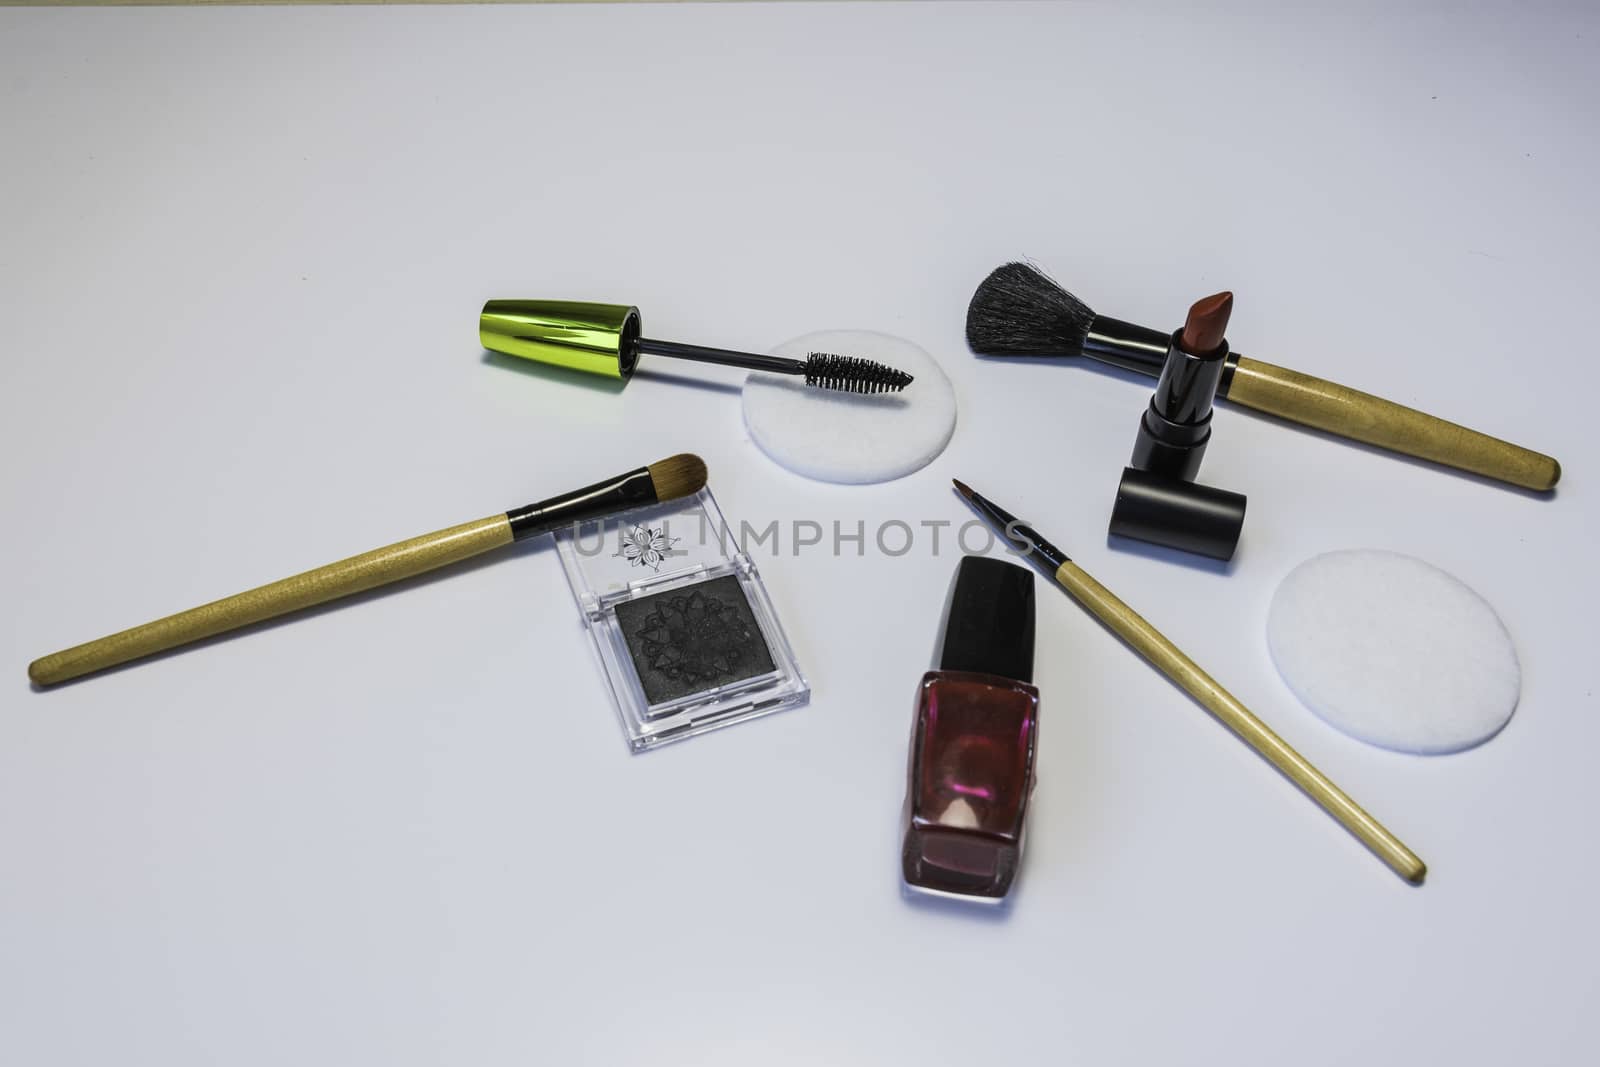 Cosmetic Tools and products on a white background